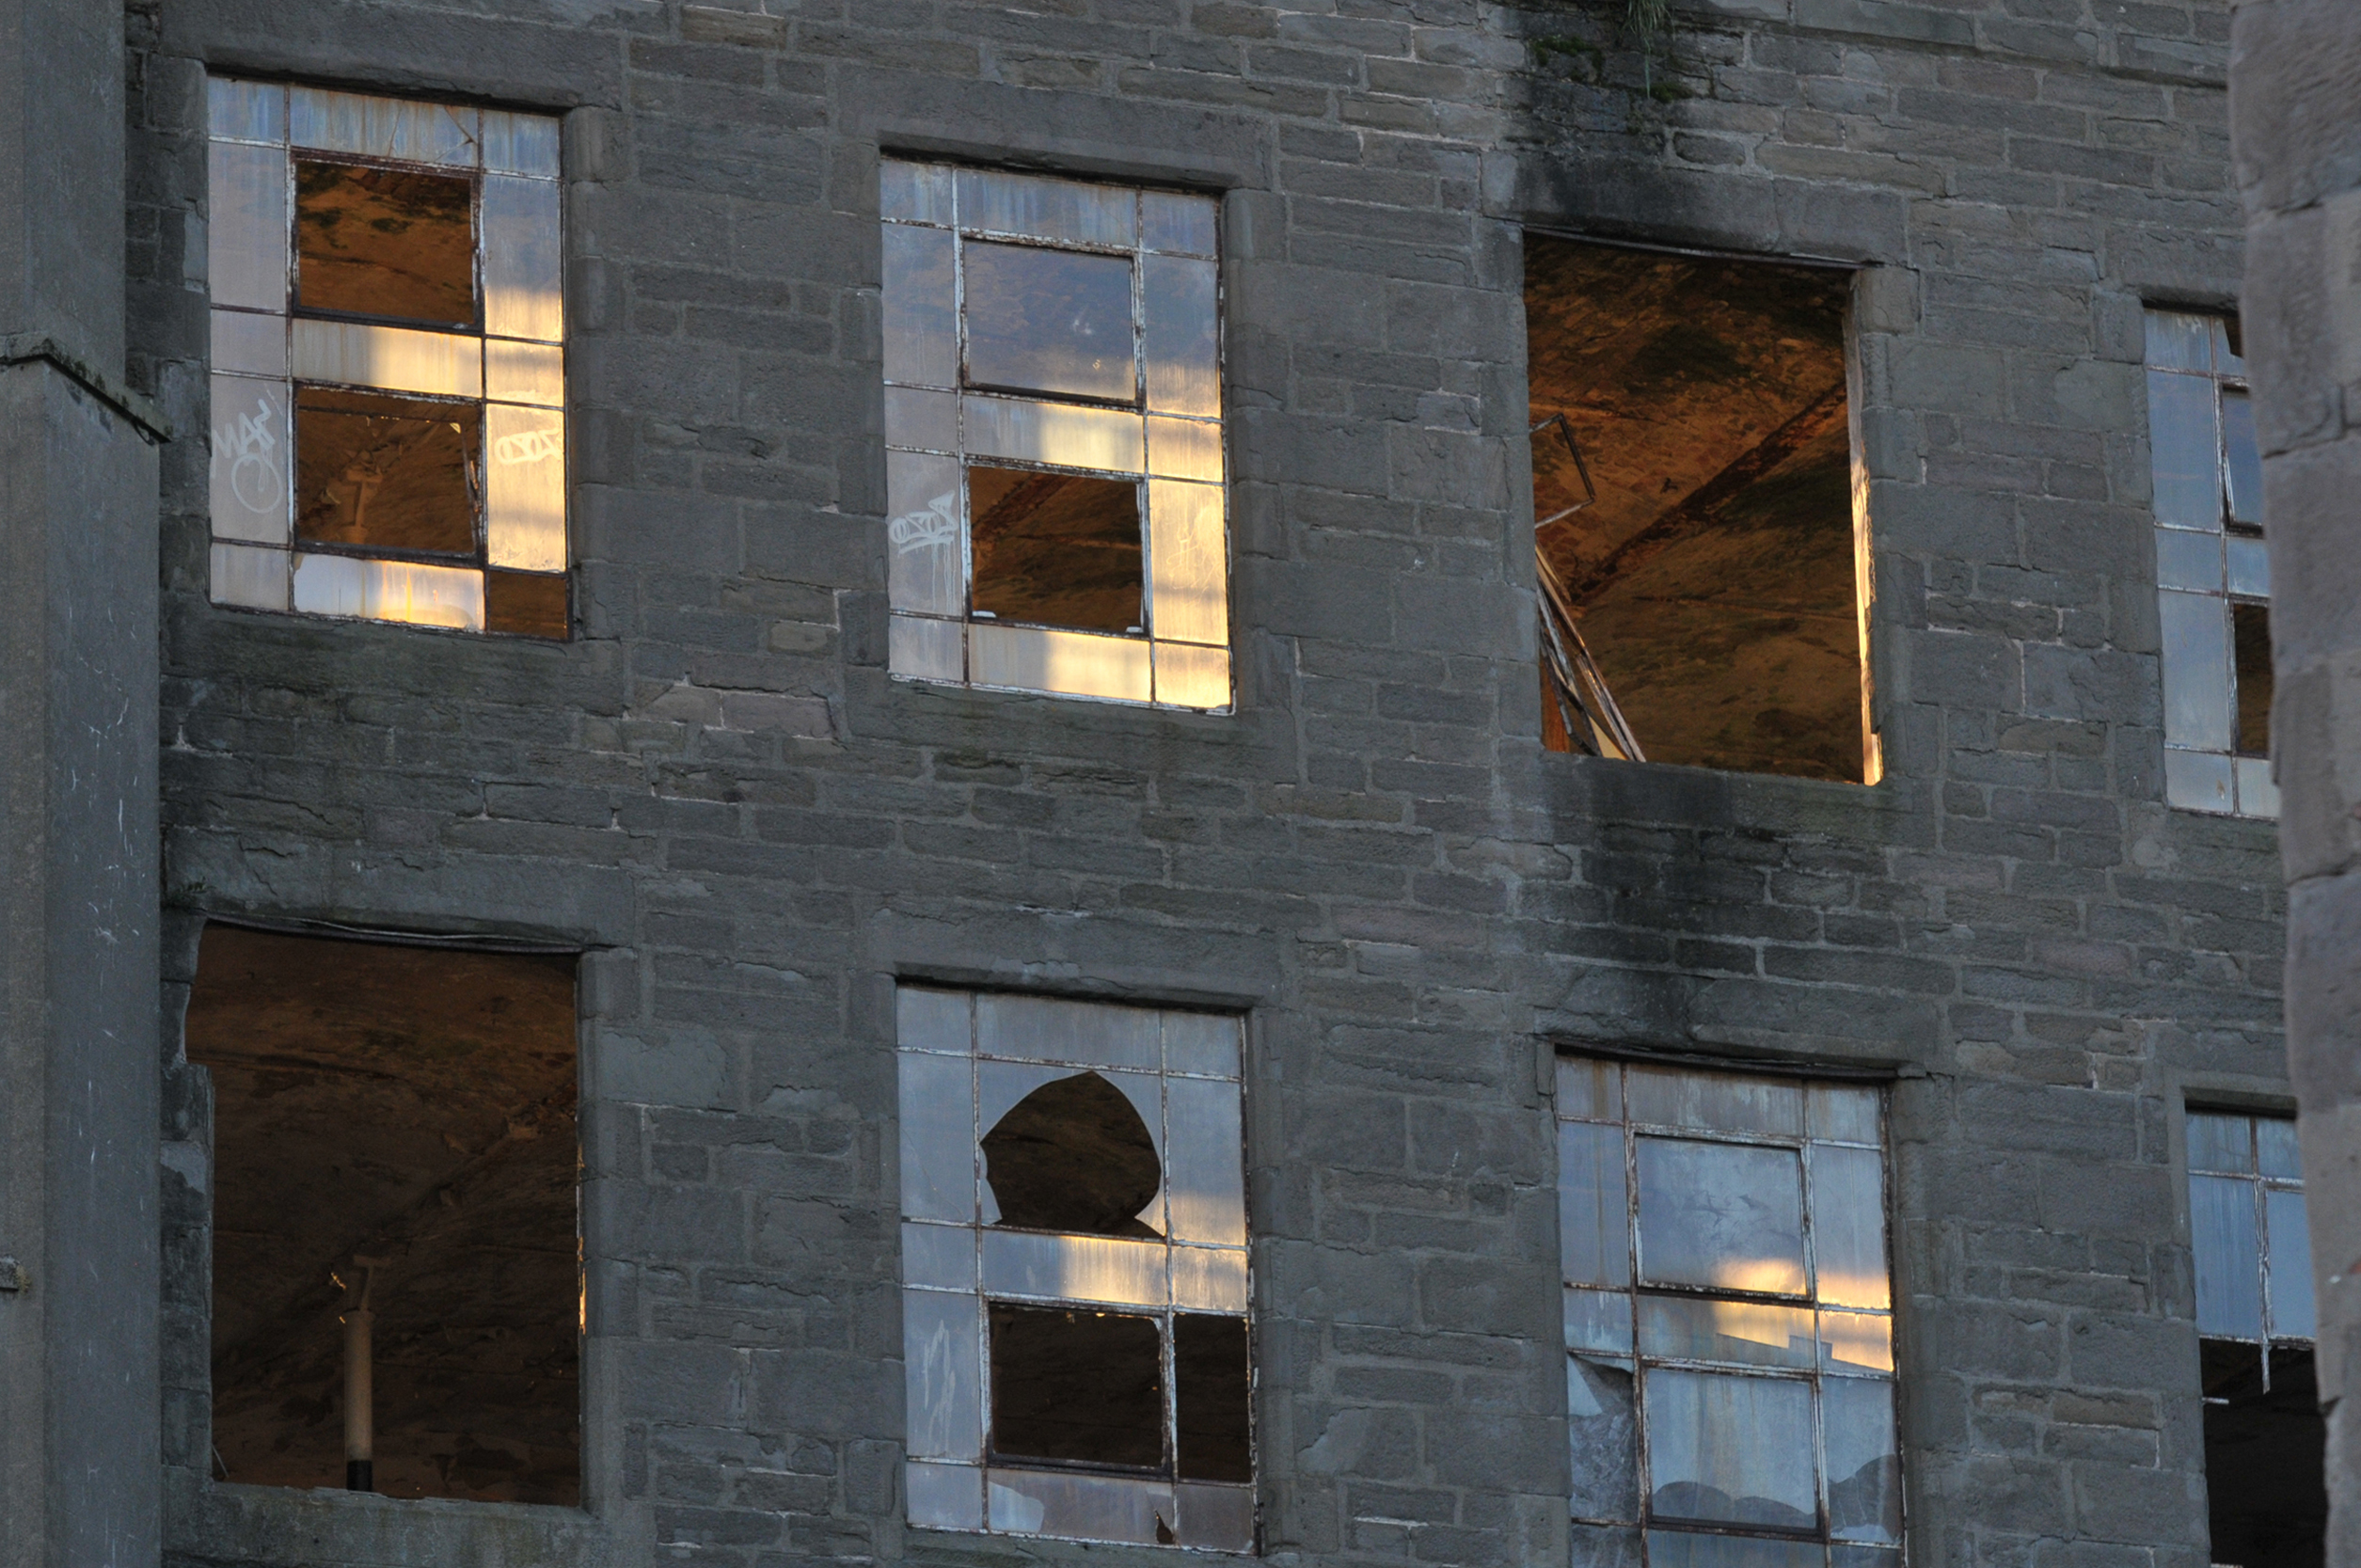 The setting sun lights a window in one of the old disused mill buildings on the Cowgate in Dundee